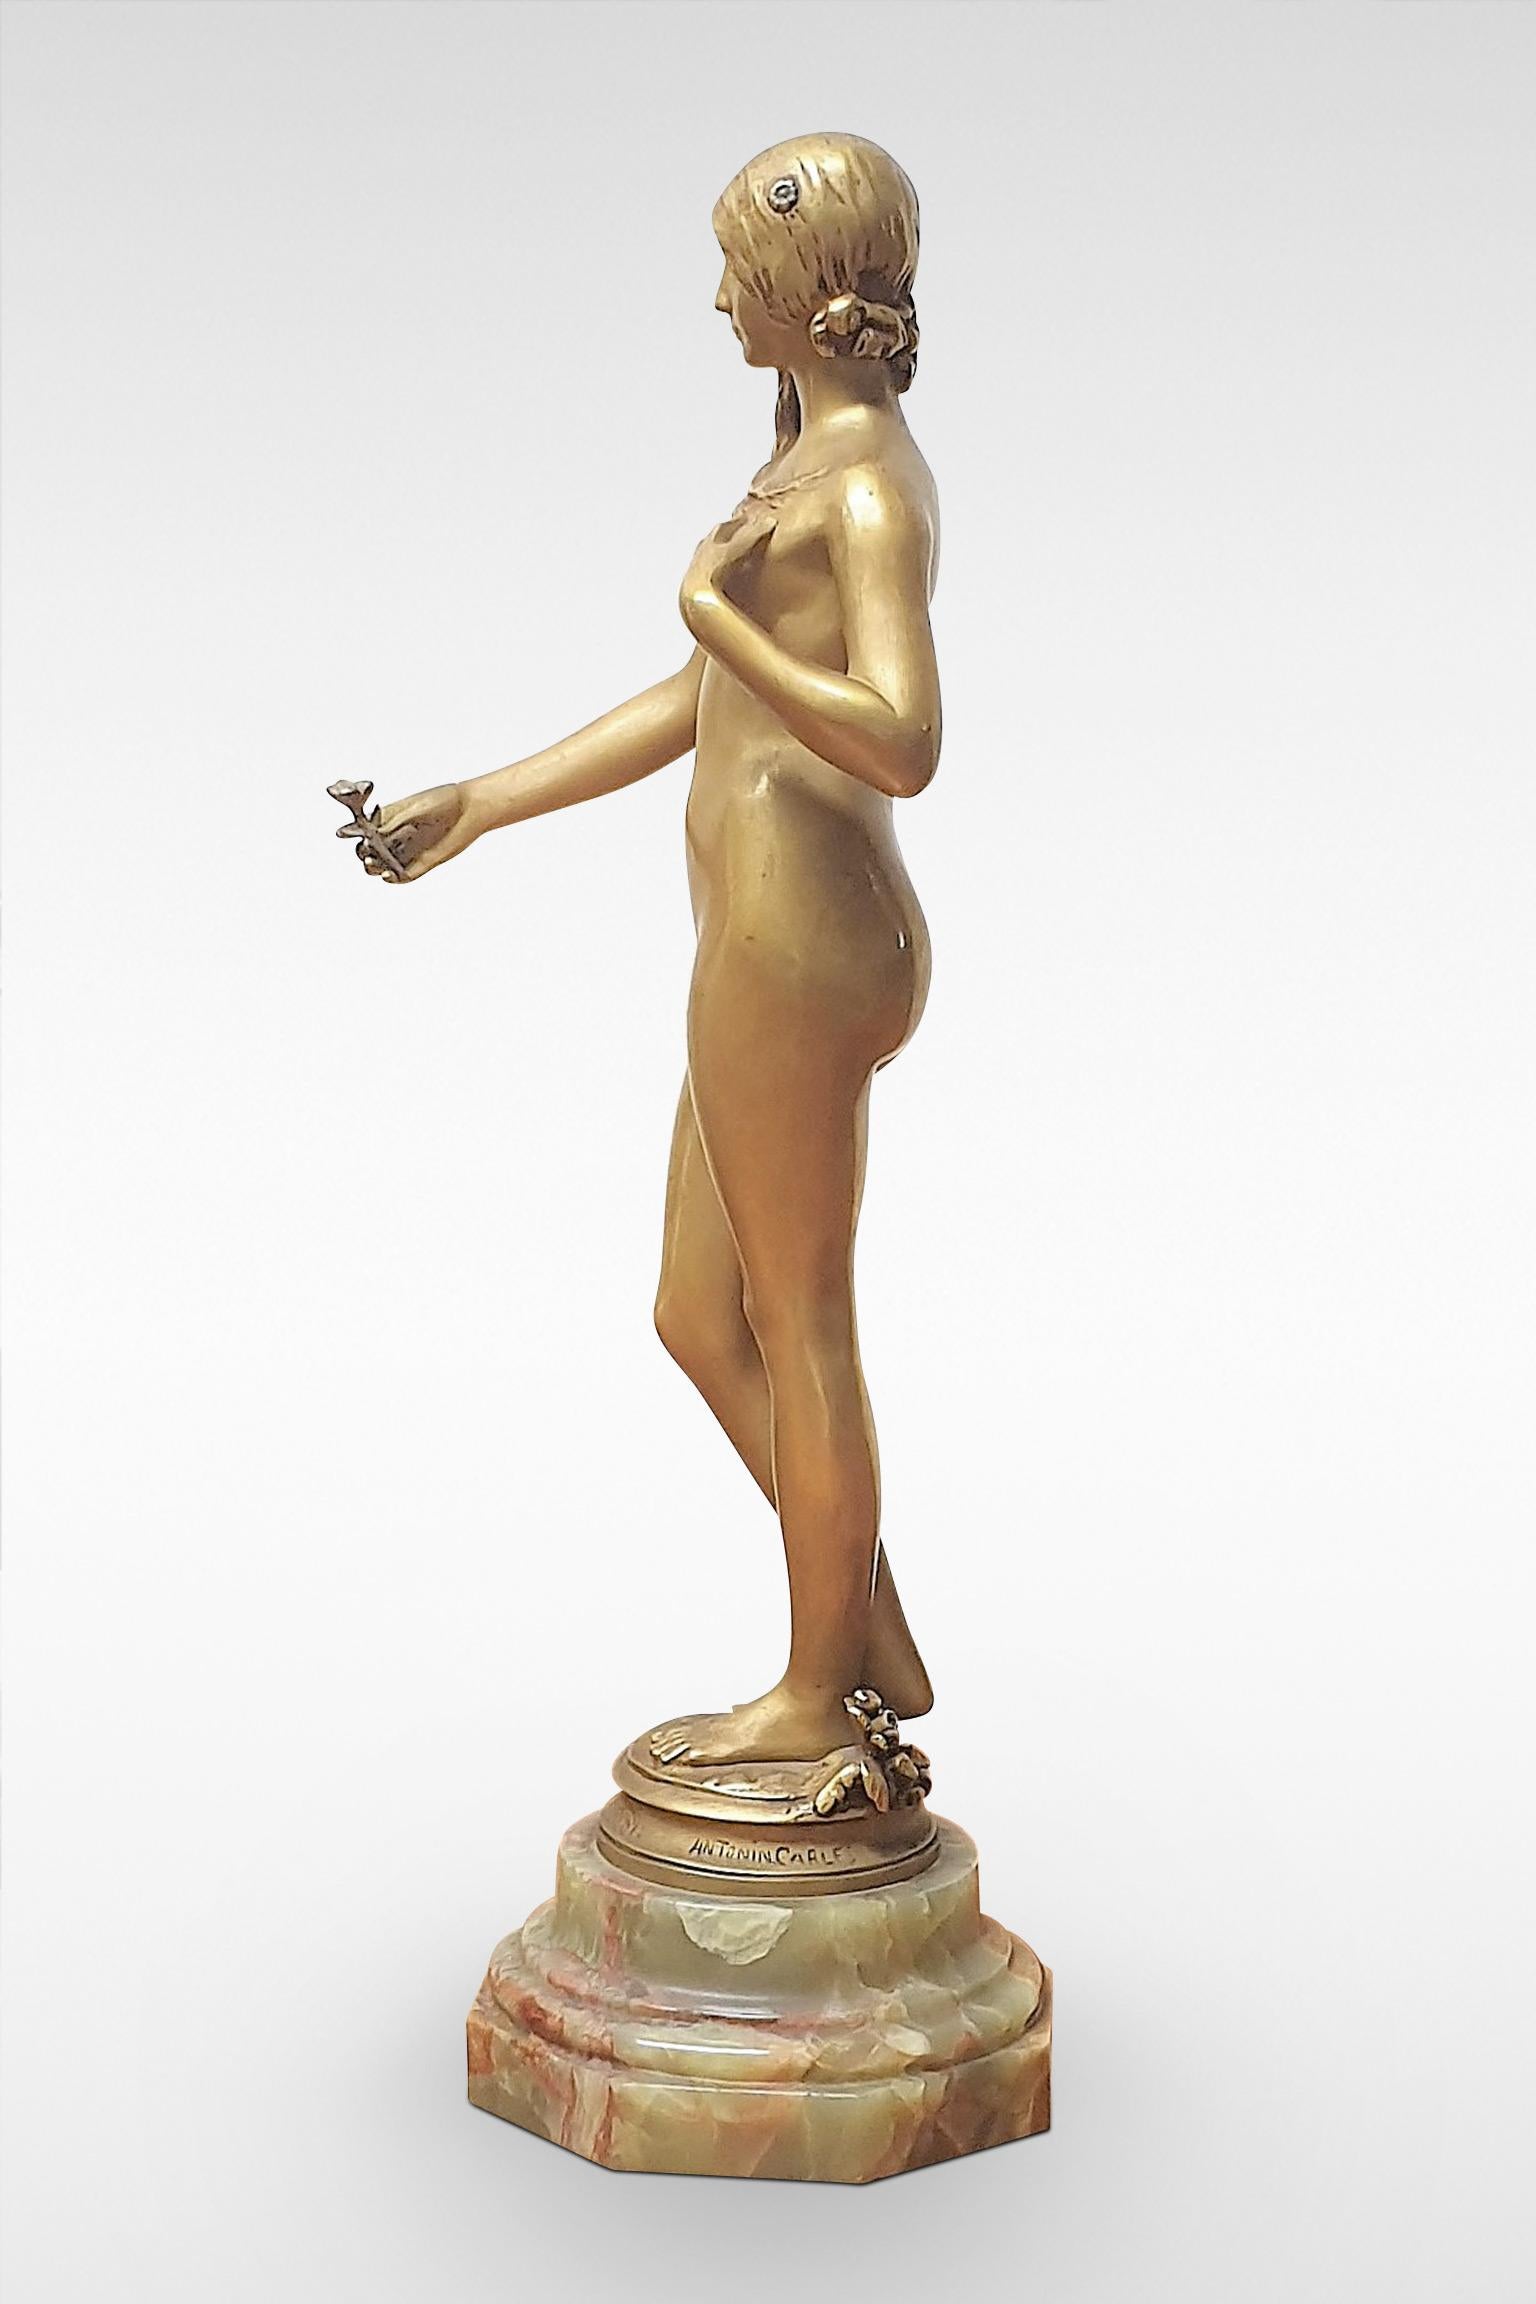 An original Art Nouveau gilt bronze sculpture ‘La Jeunesse’ of a nude young lady, by Antonin Carles. Signed with designer’s signature and foundry marks. Mounted on an onyx base, and in excellent condition, circa 1900.